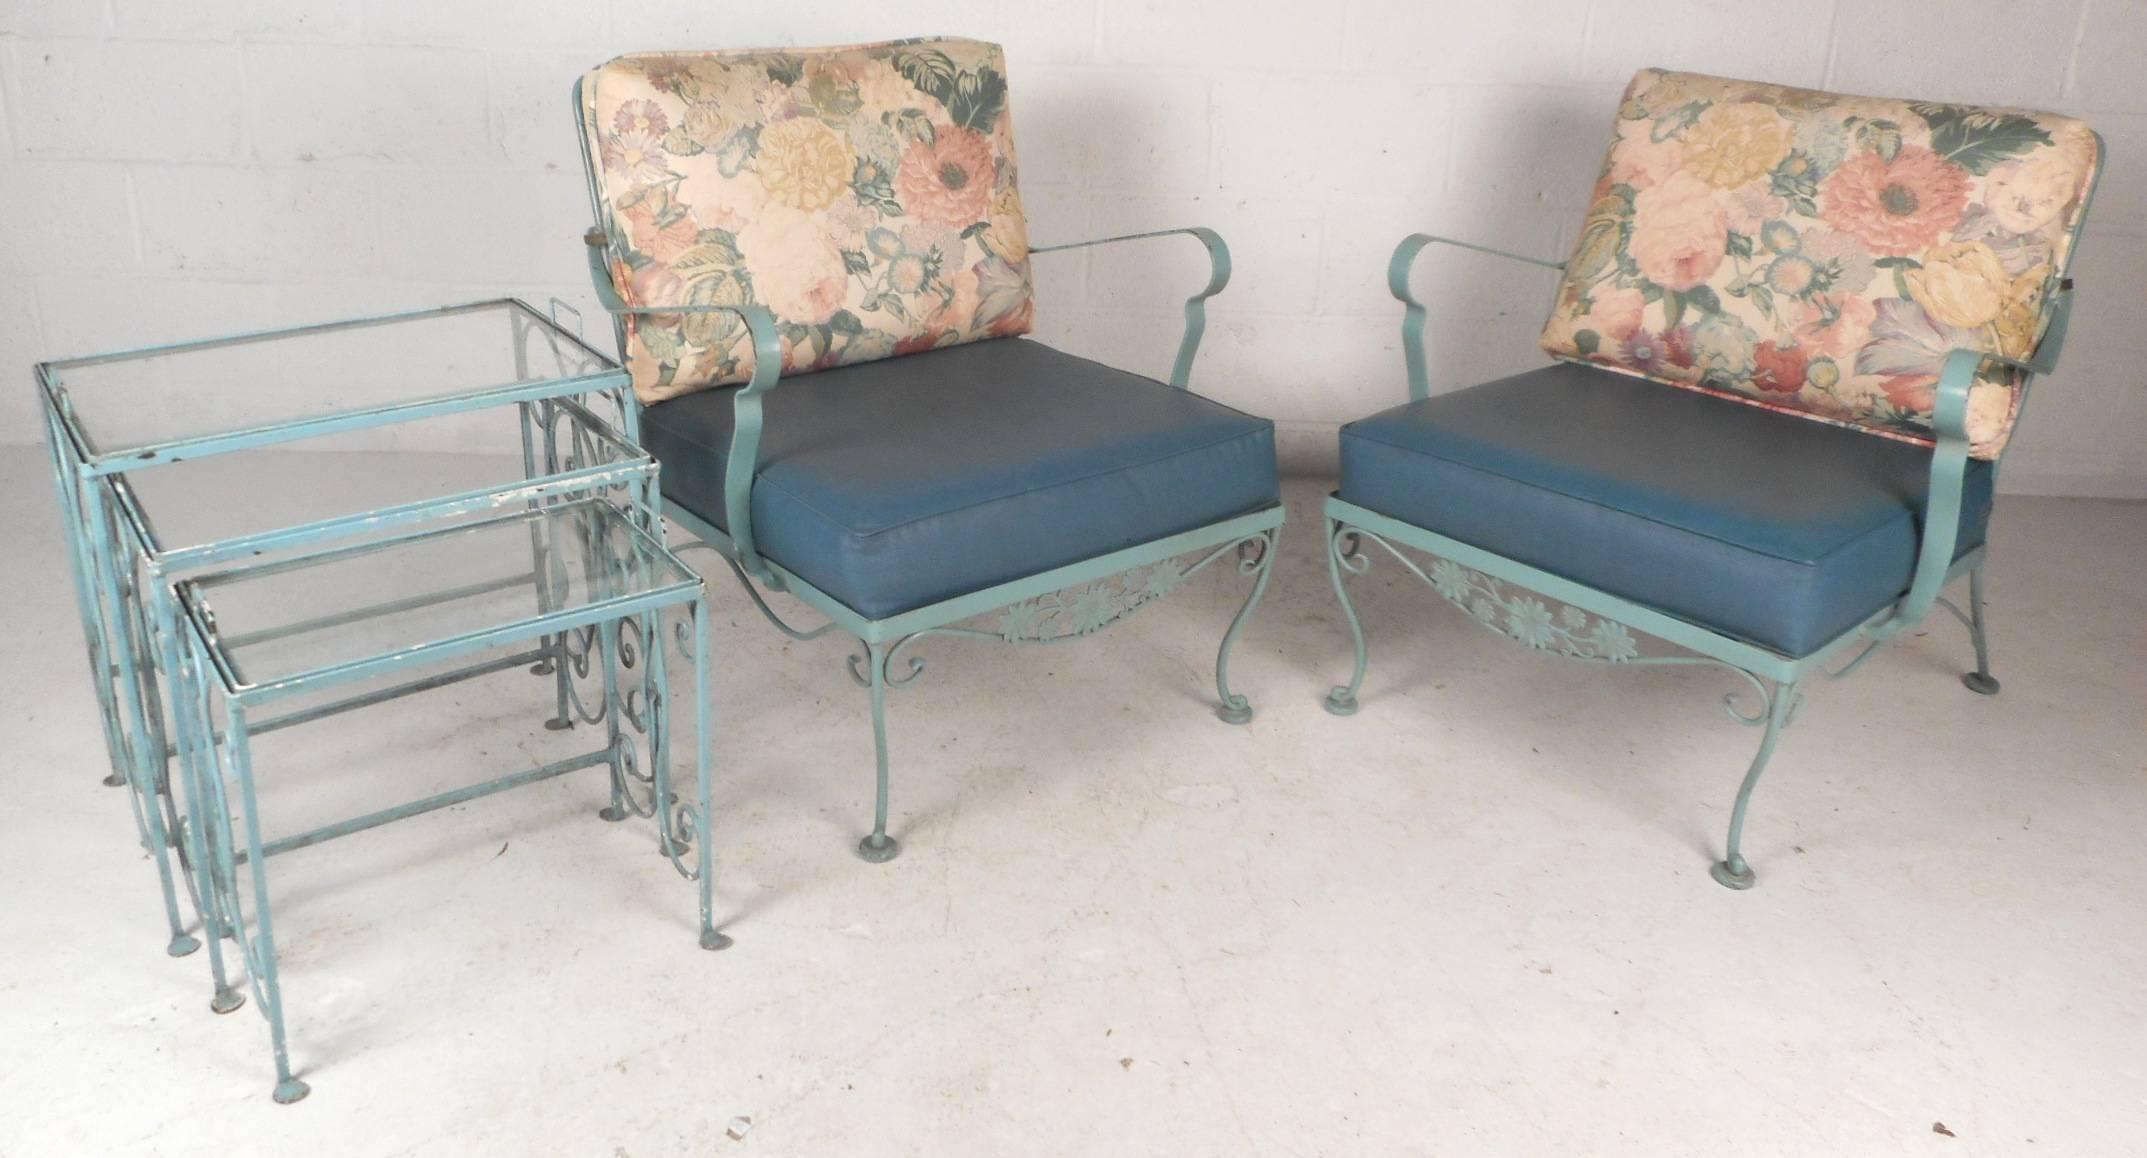 This stunning vintage modern patio set includes: four lounge chairs, an ottoman, an end table, three nesting tables, a dining table and six chairs. Two lounge chairs combine to form a stylish settee adding to the allure. Impressive bent iron rod